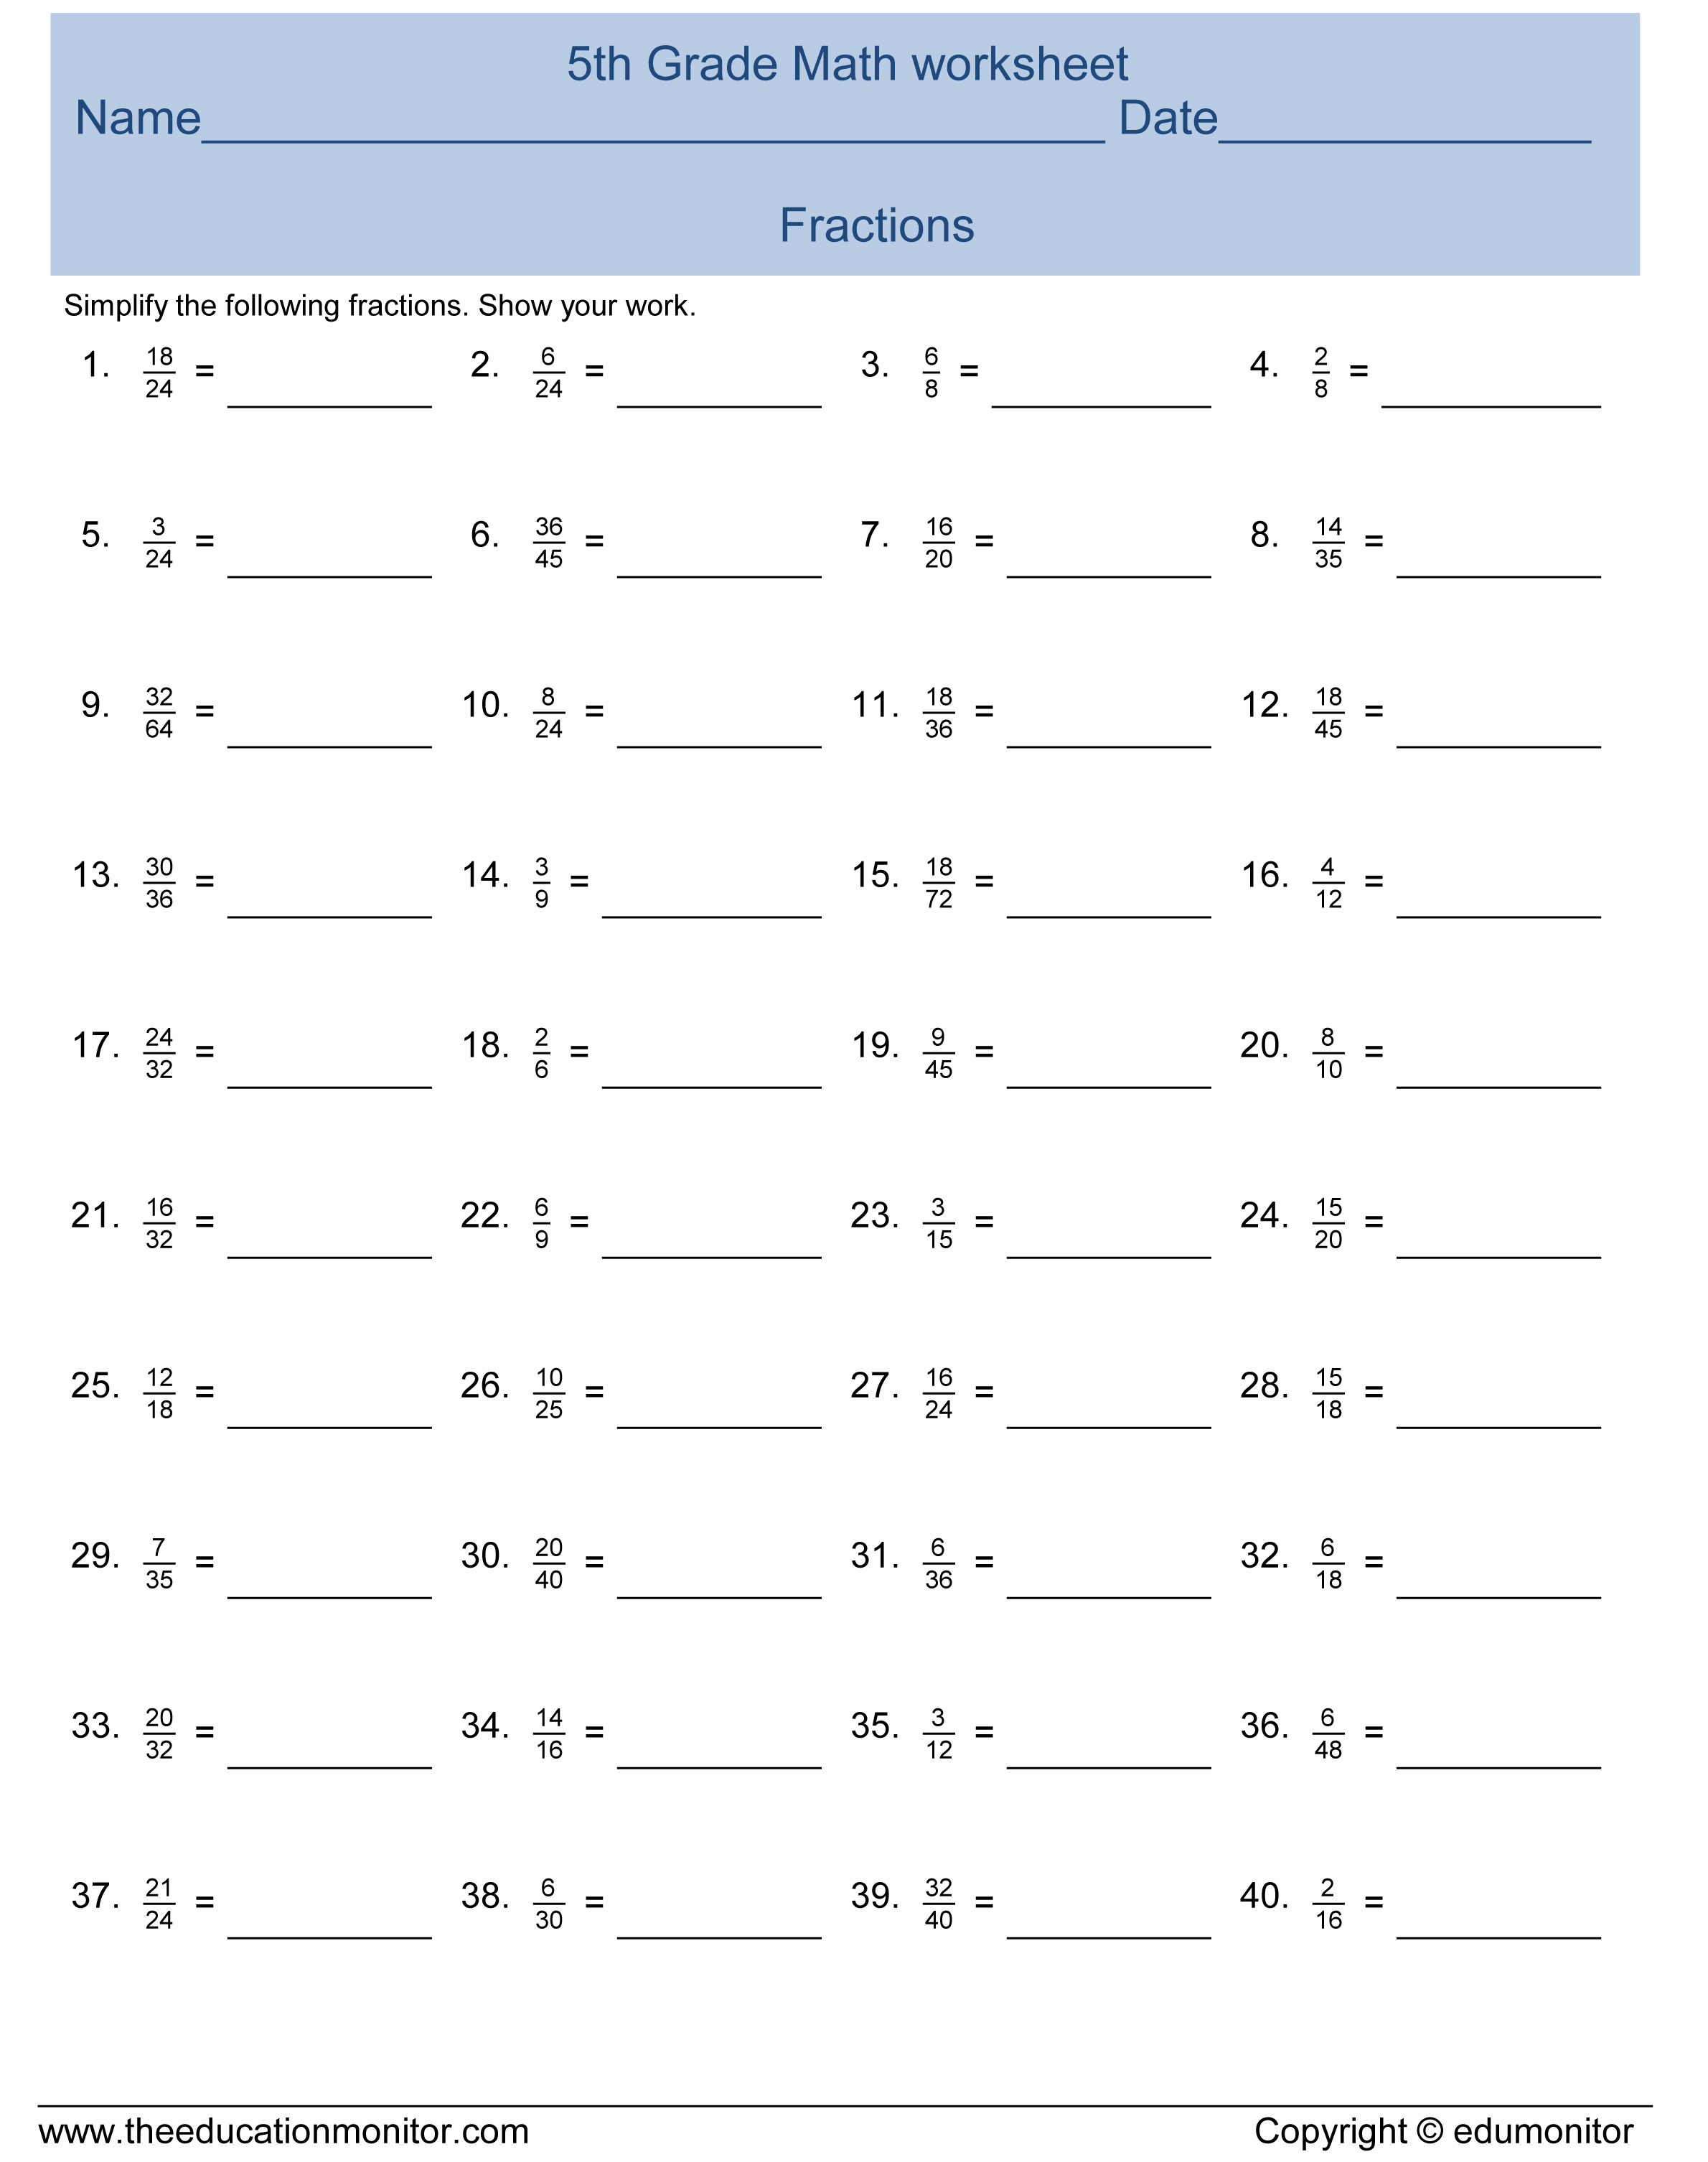 Simplify Fractions Worksheets And Printables For Eids-Edumonitor | Free Printable Simplifying Fractions Worksheets